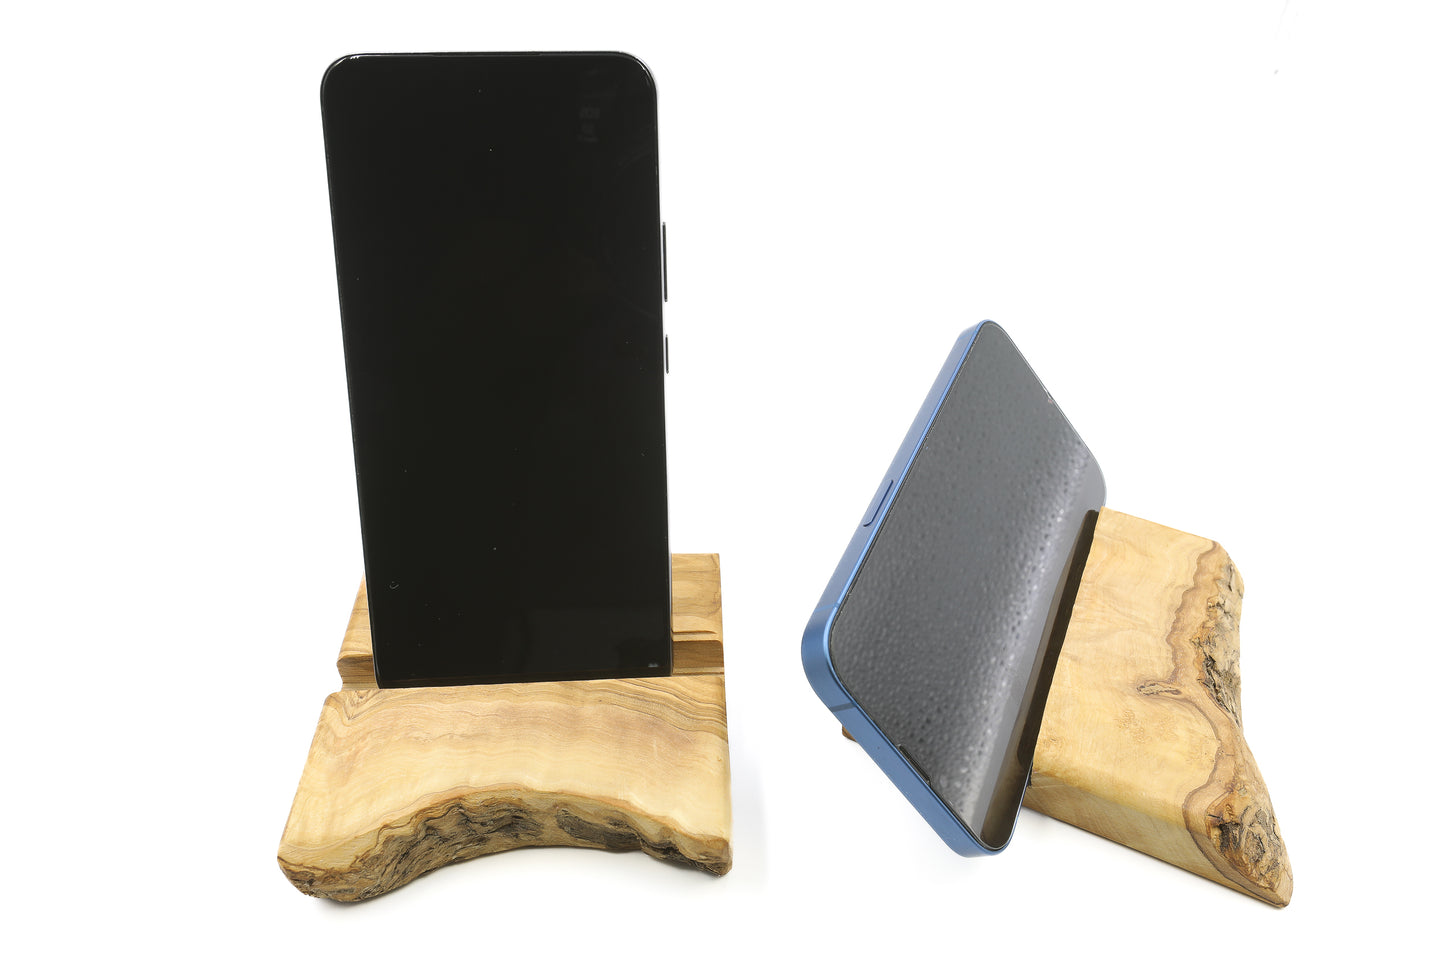 Natural olive wood mobile phone holder for your everyday use